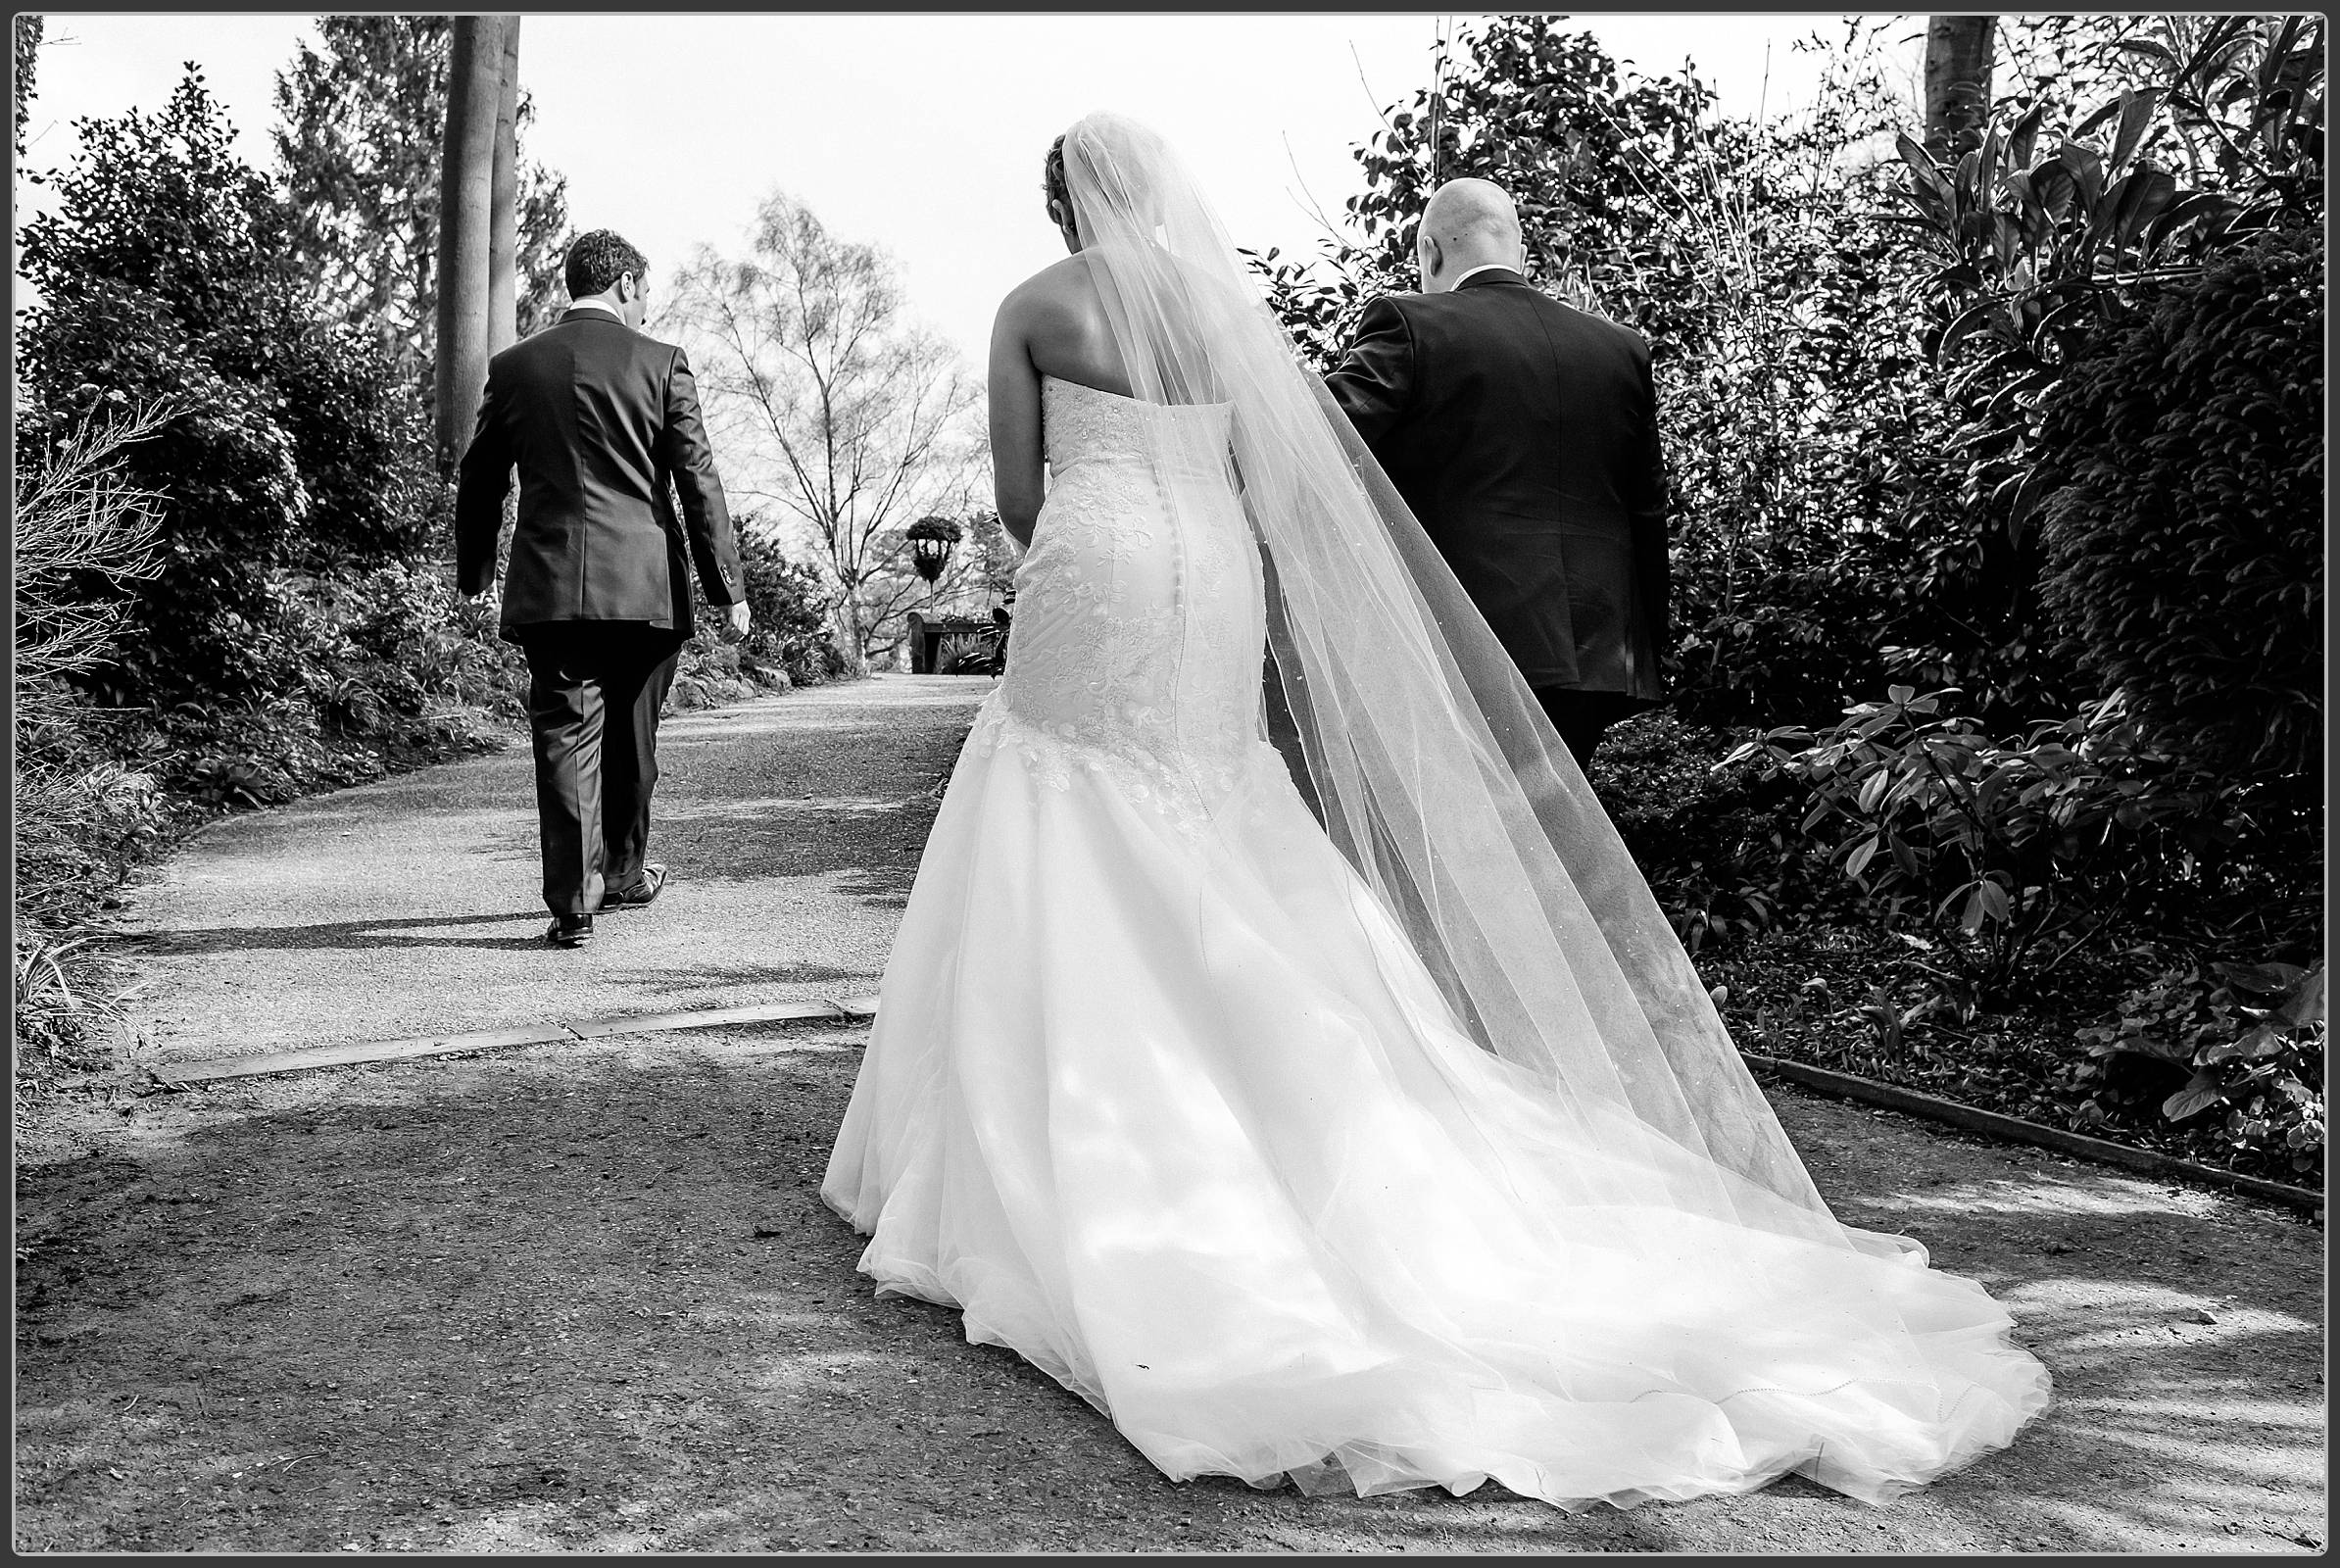 The bride and groom in black and white